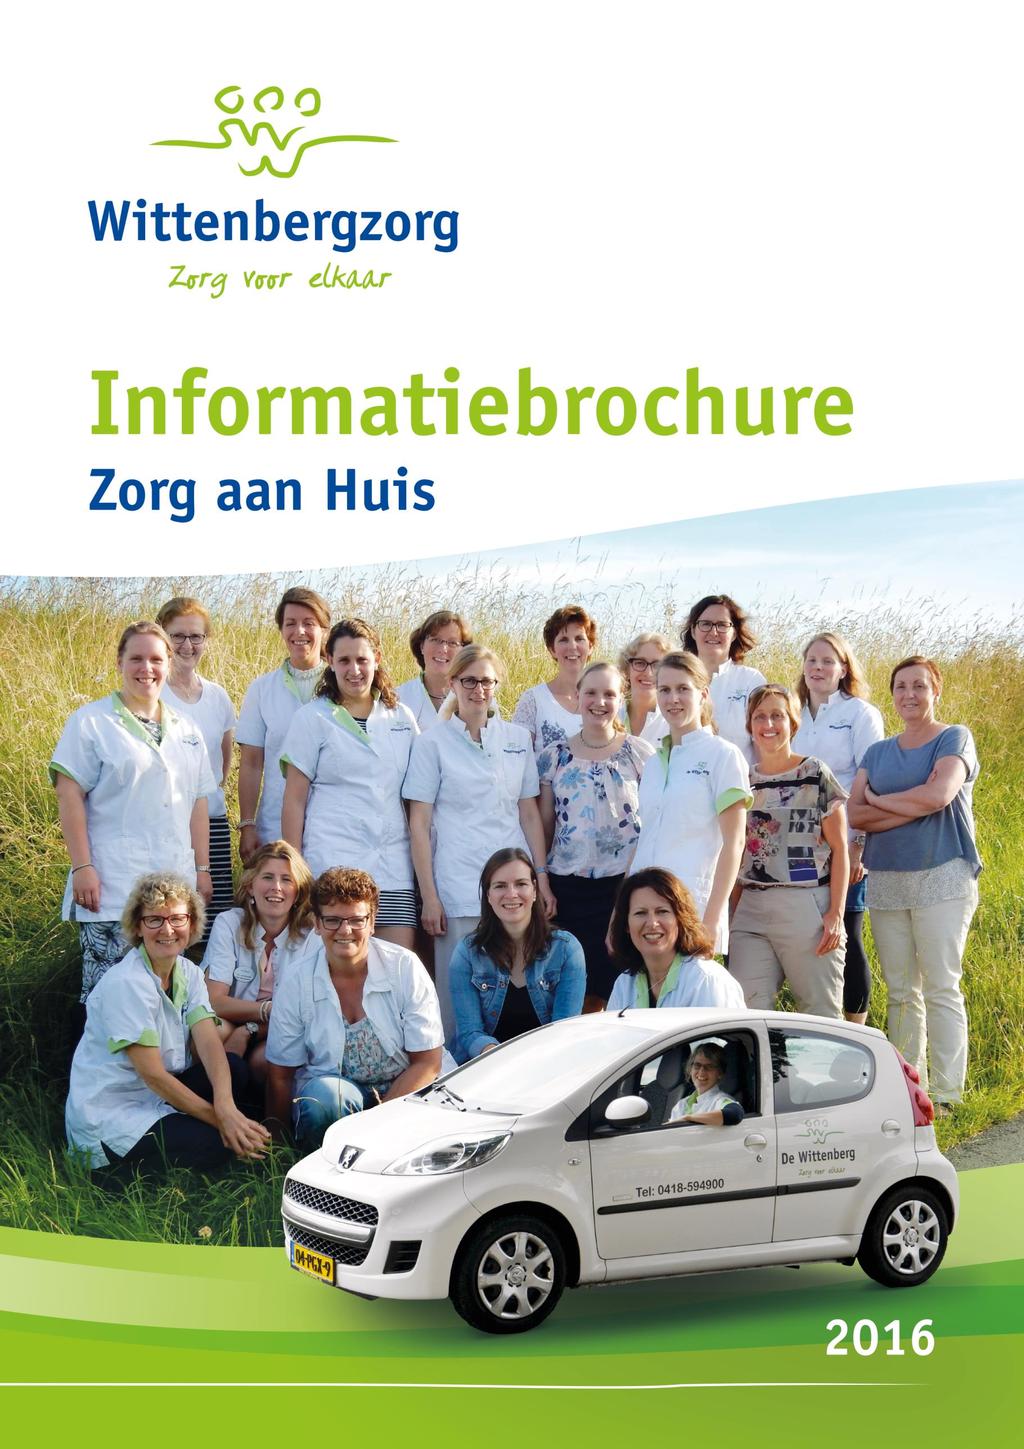 E-mailadres: info@wittenbergzorg.